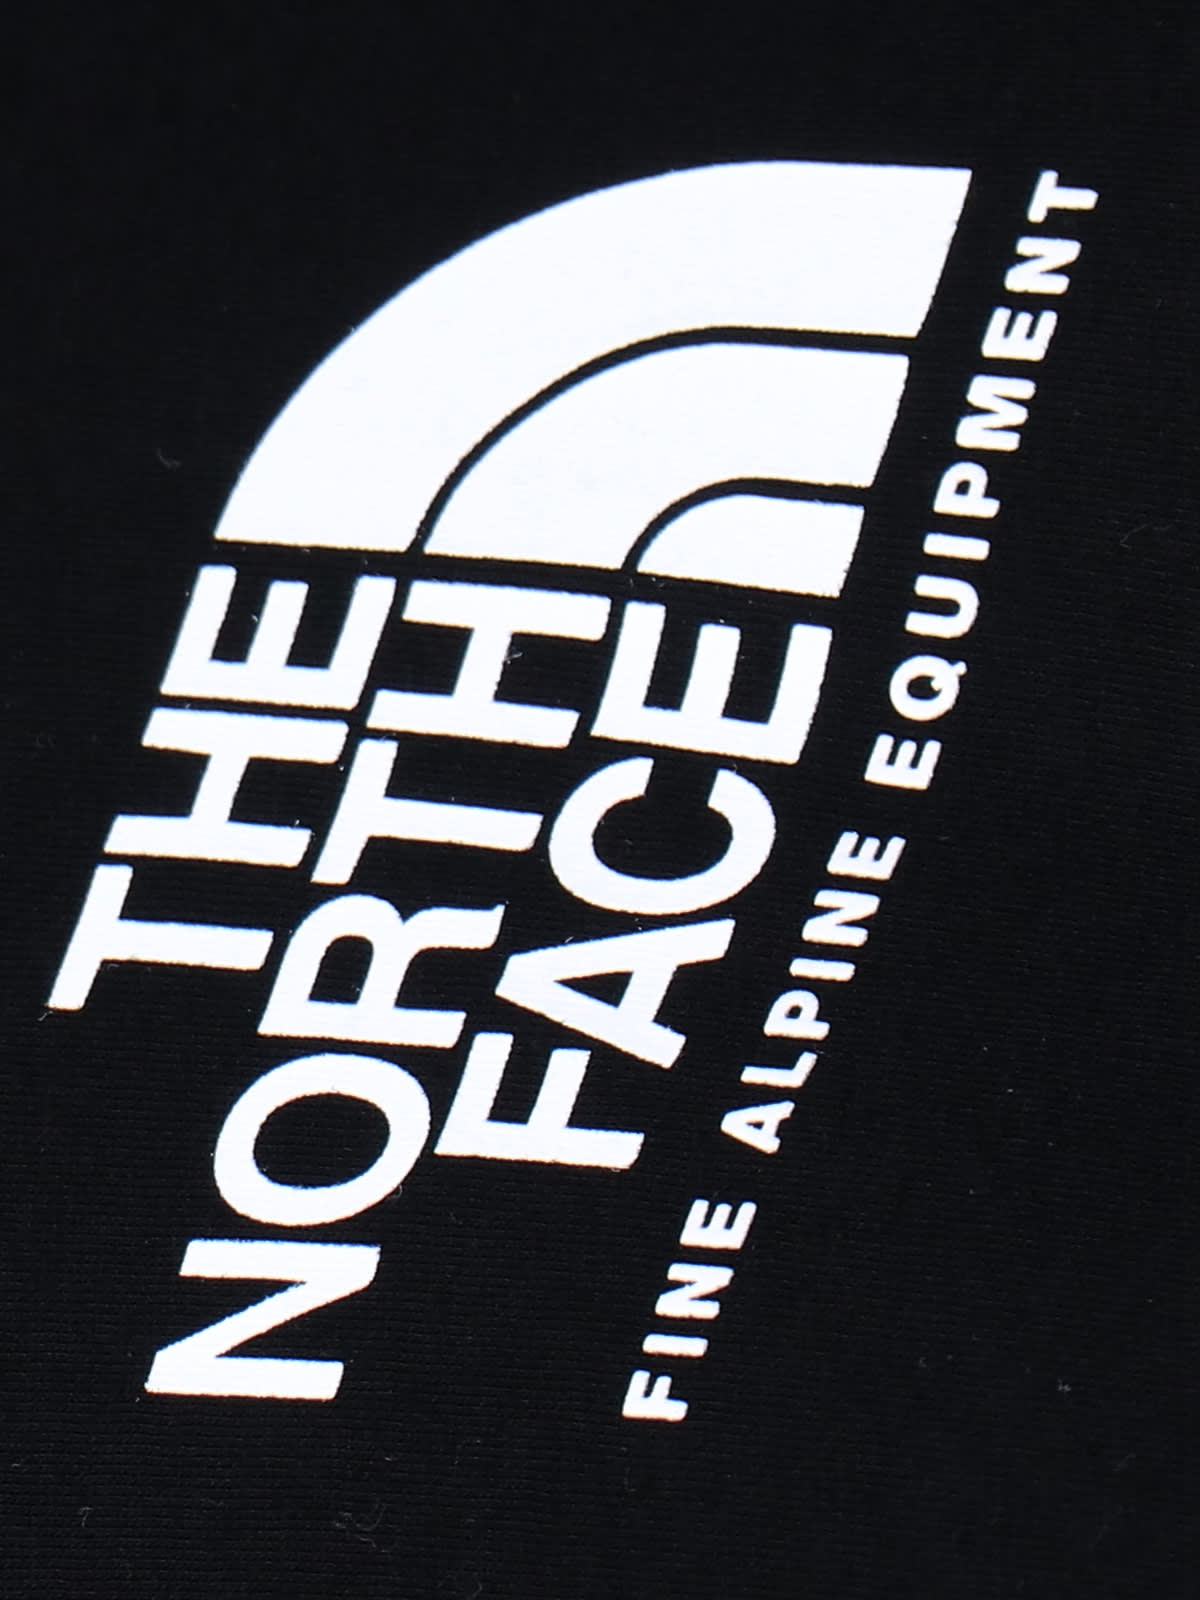 Shop The North Face T-shirt In Black